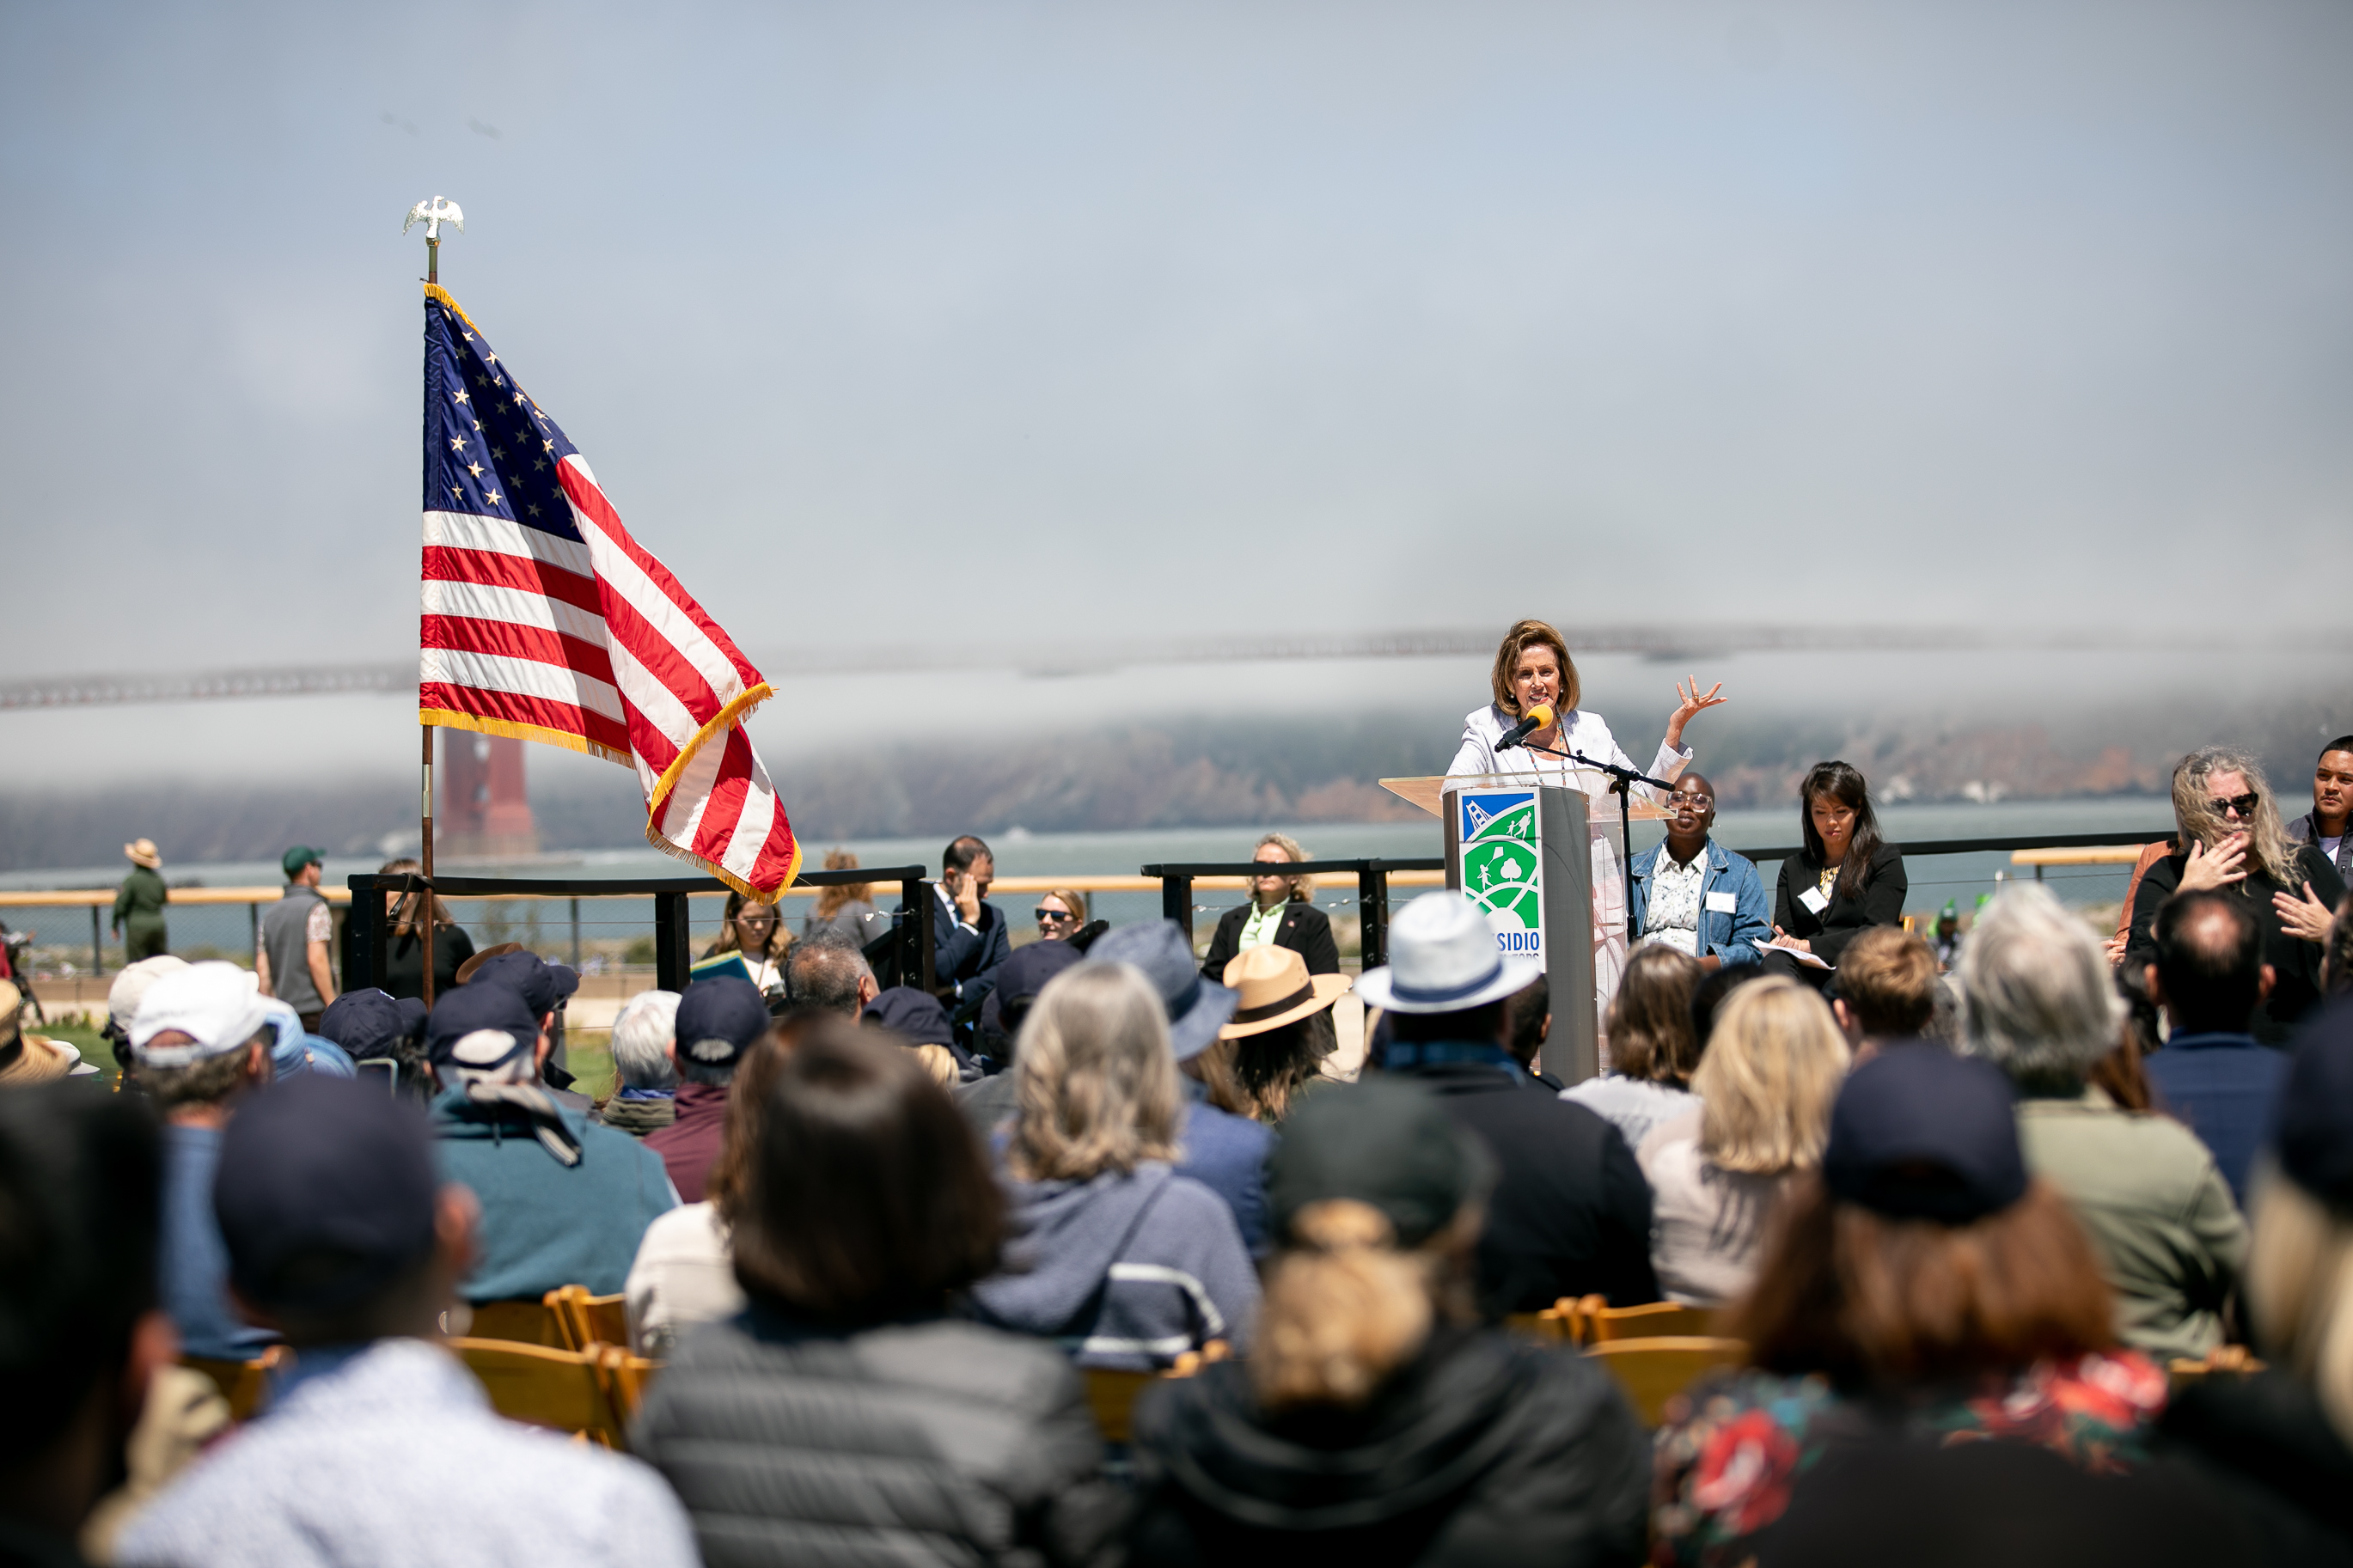 Image of Nancy Pelosi speaking at a podium with a crowd of people listening in front of her and the Golden Gate Bridge hidden in fog behind her.